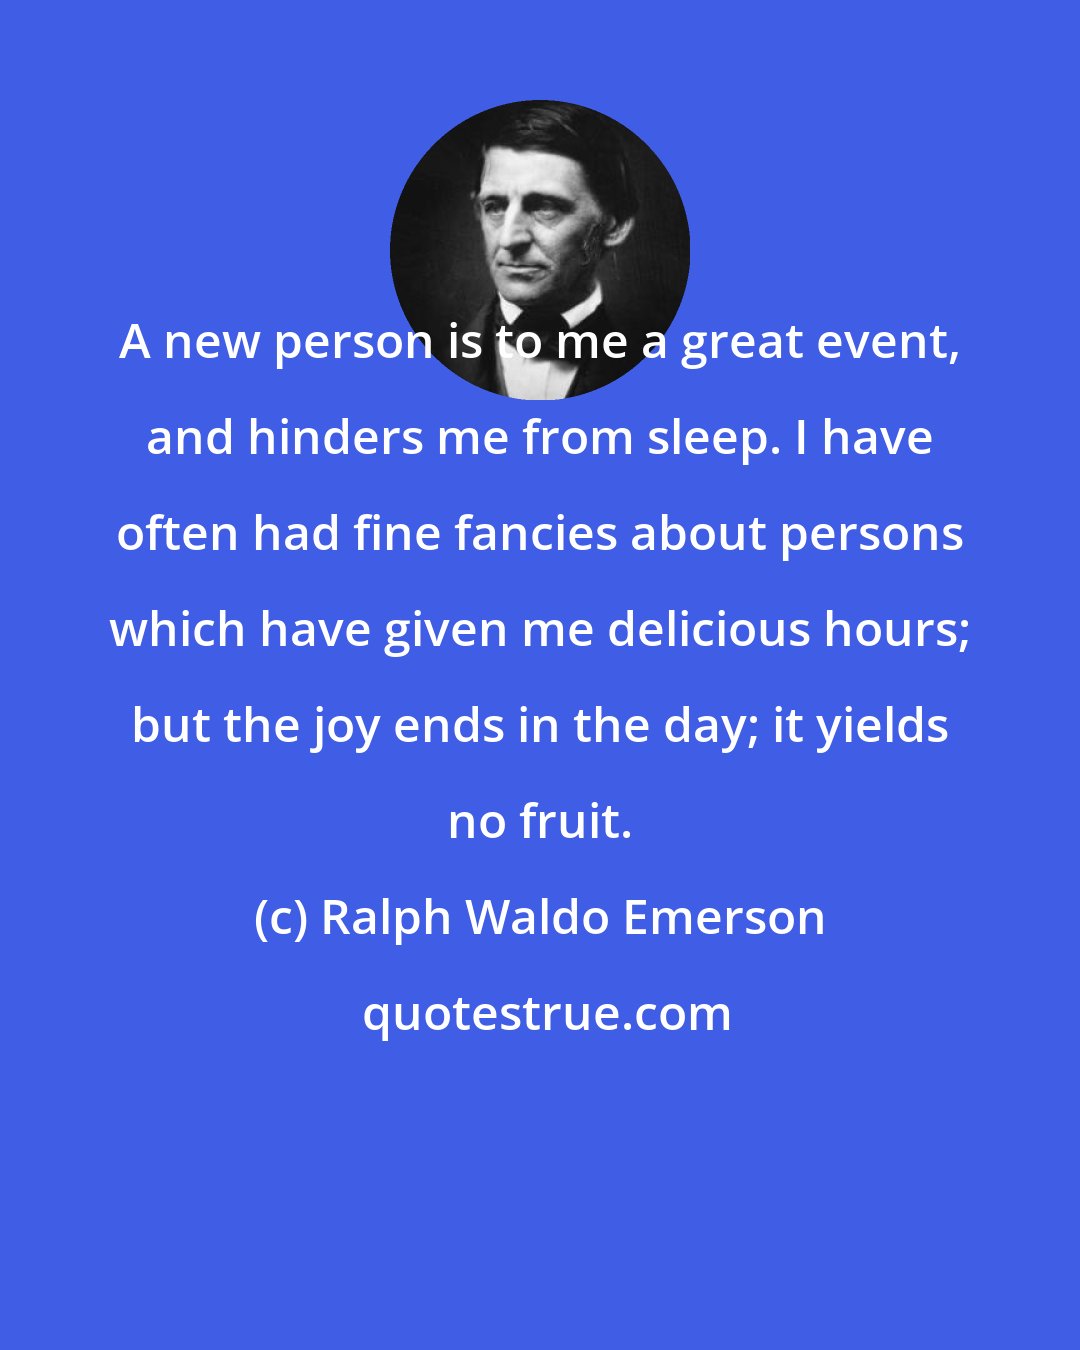 Ralph Waldo Emerson: A new person is to me a great event, and hinders me from sleep. I have often had fine fancies about persons which have given me delicious hours; but the joy ends in the day; it yields no fruit.